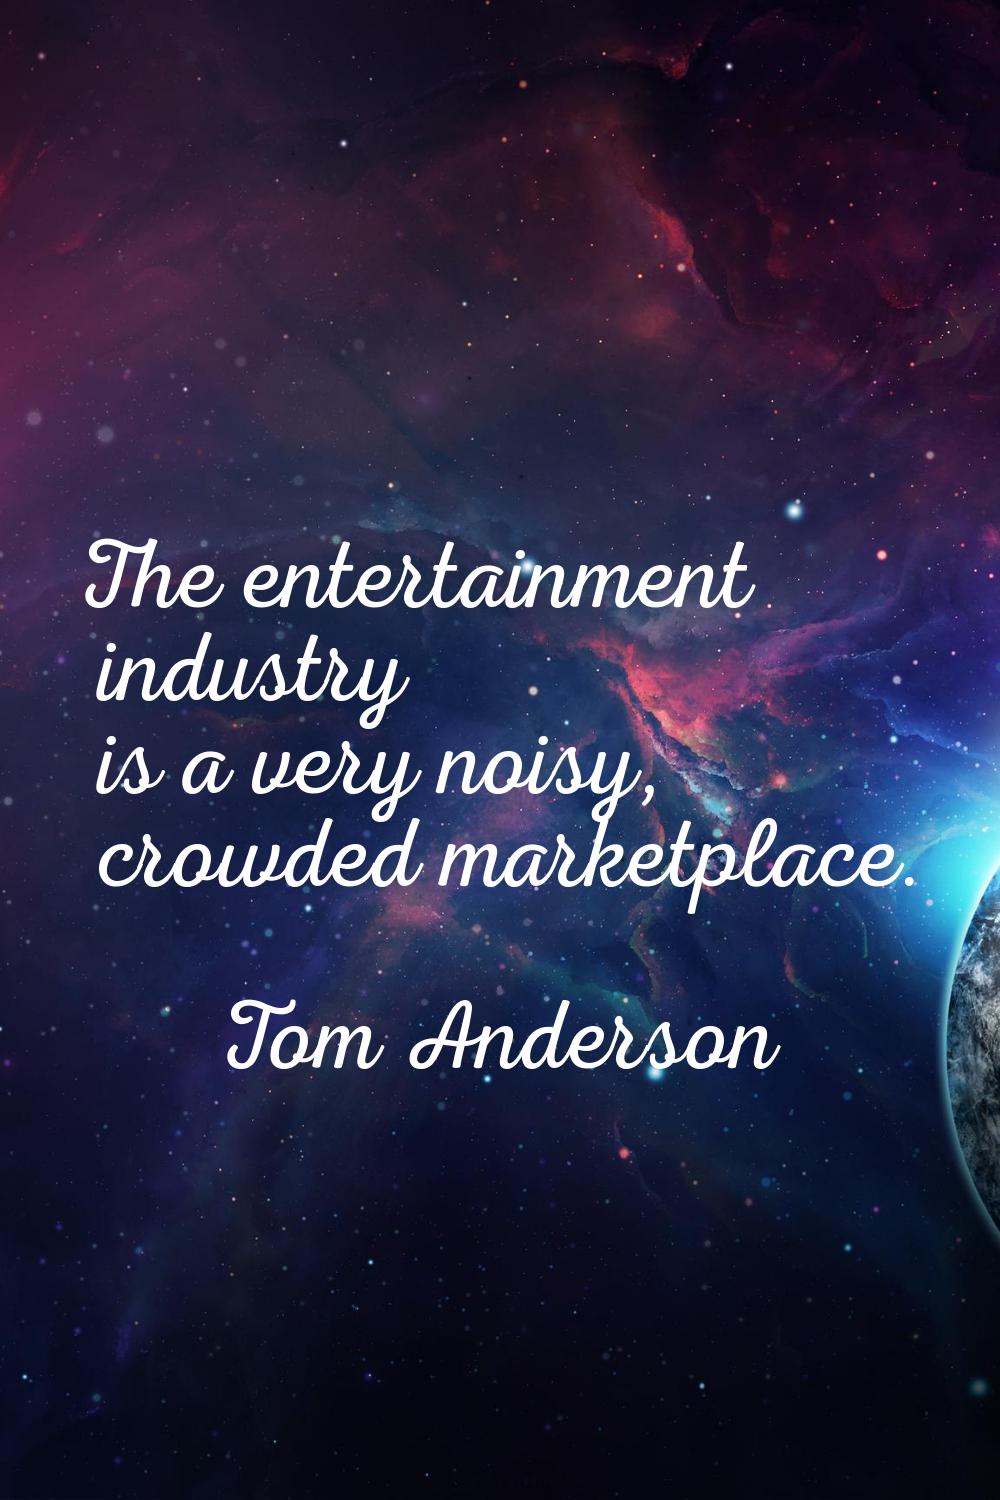 The entertainment industry is a very noisy, crowded marketplace.